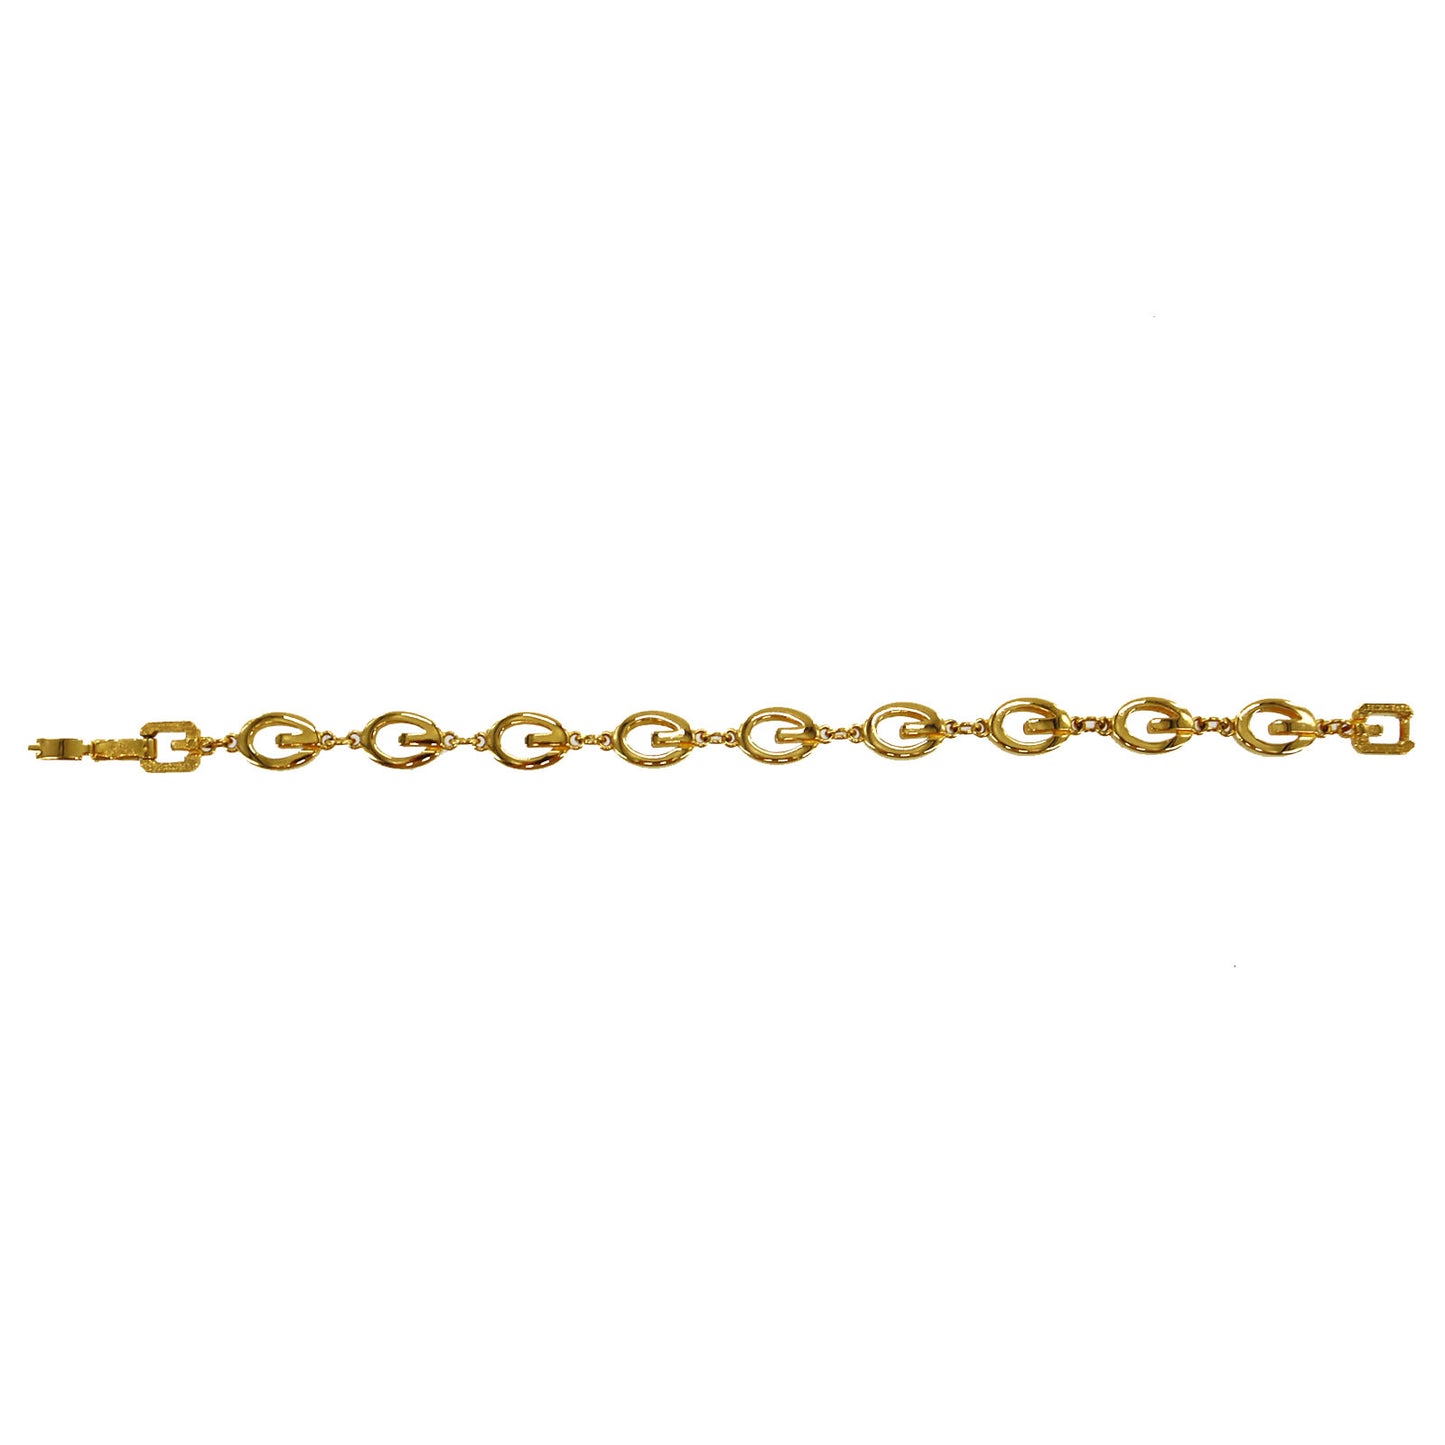 GIVENCHY G Logos Gold Bracelet 7.4in Gold-Plated Accessories # BO687